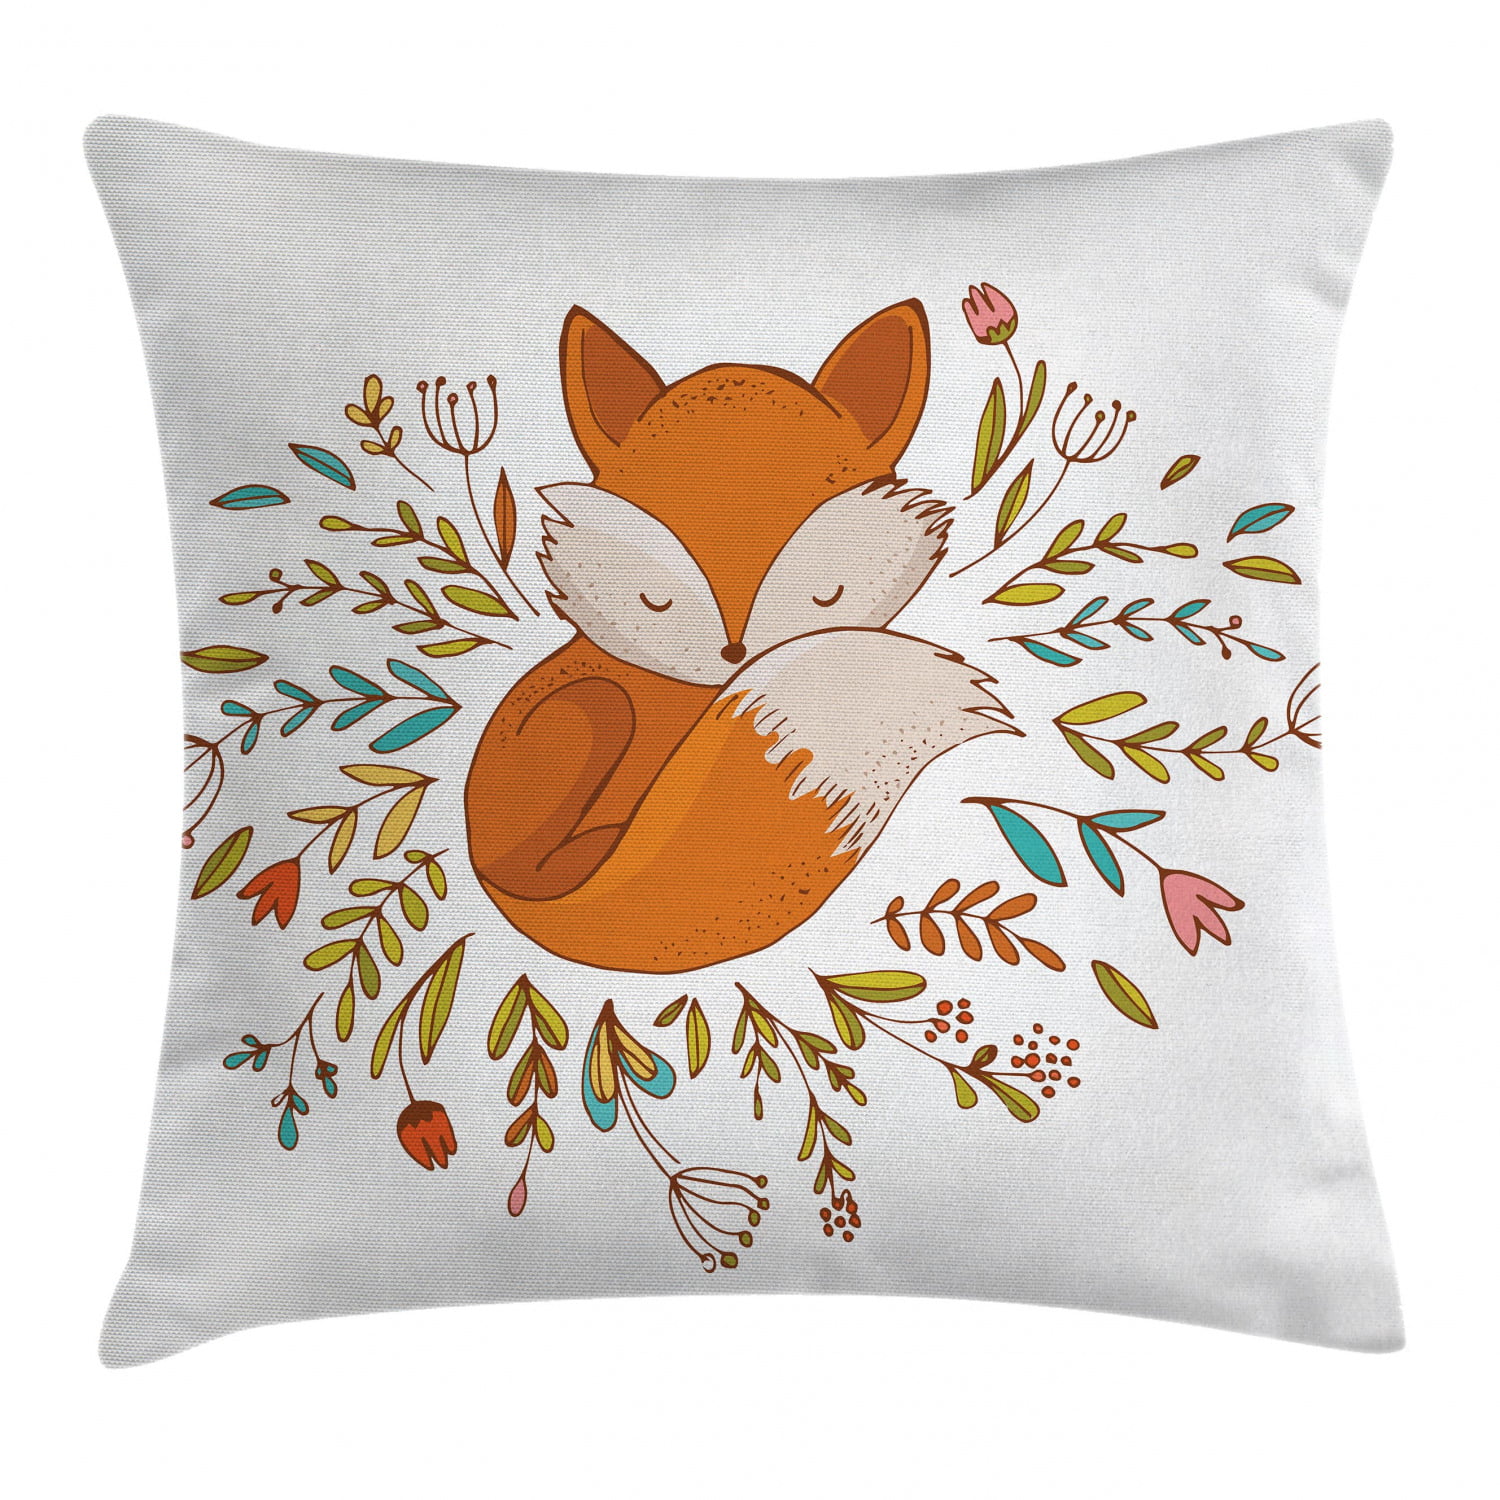 US Seller-set of 4 outdoor throw pillow covers cushion covers cartoon fox animal